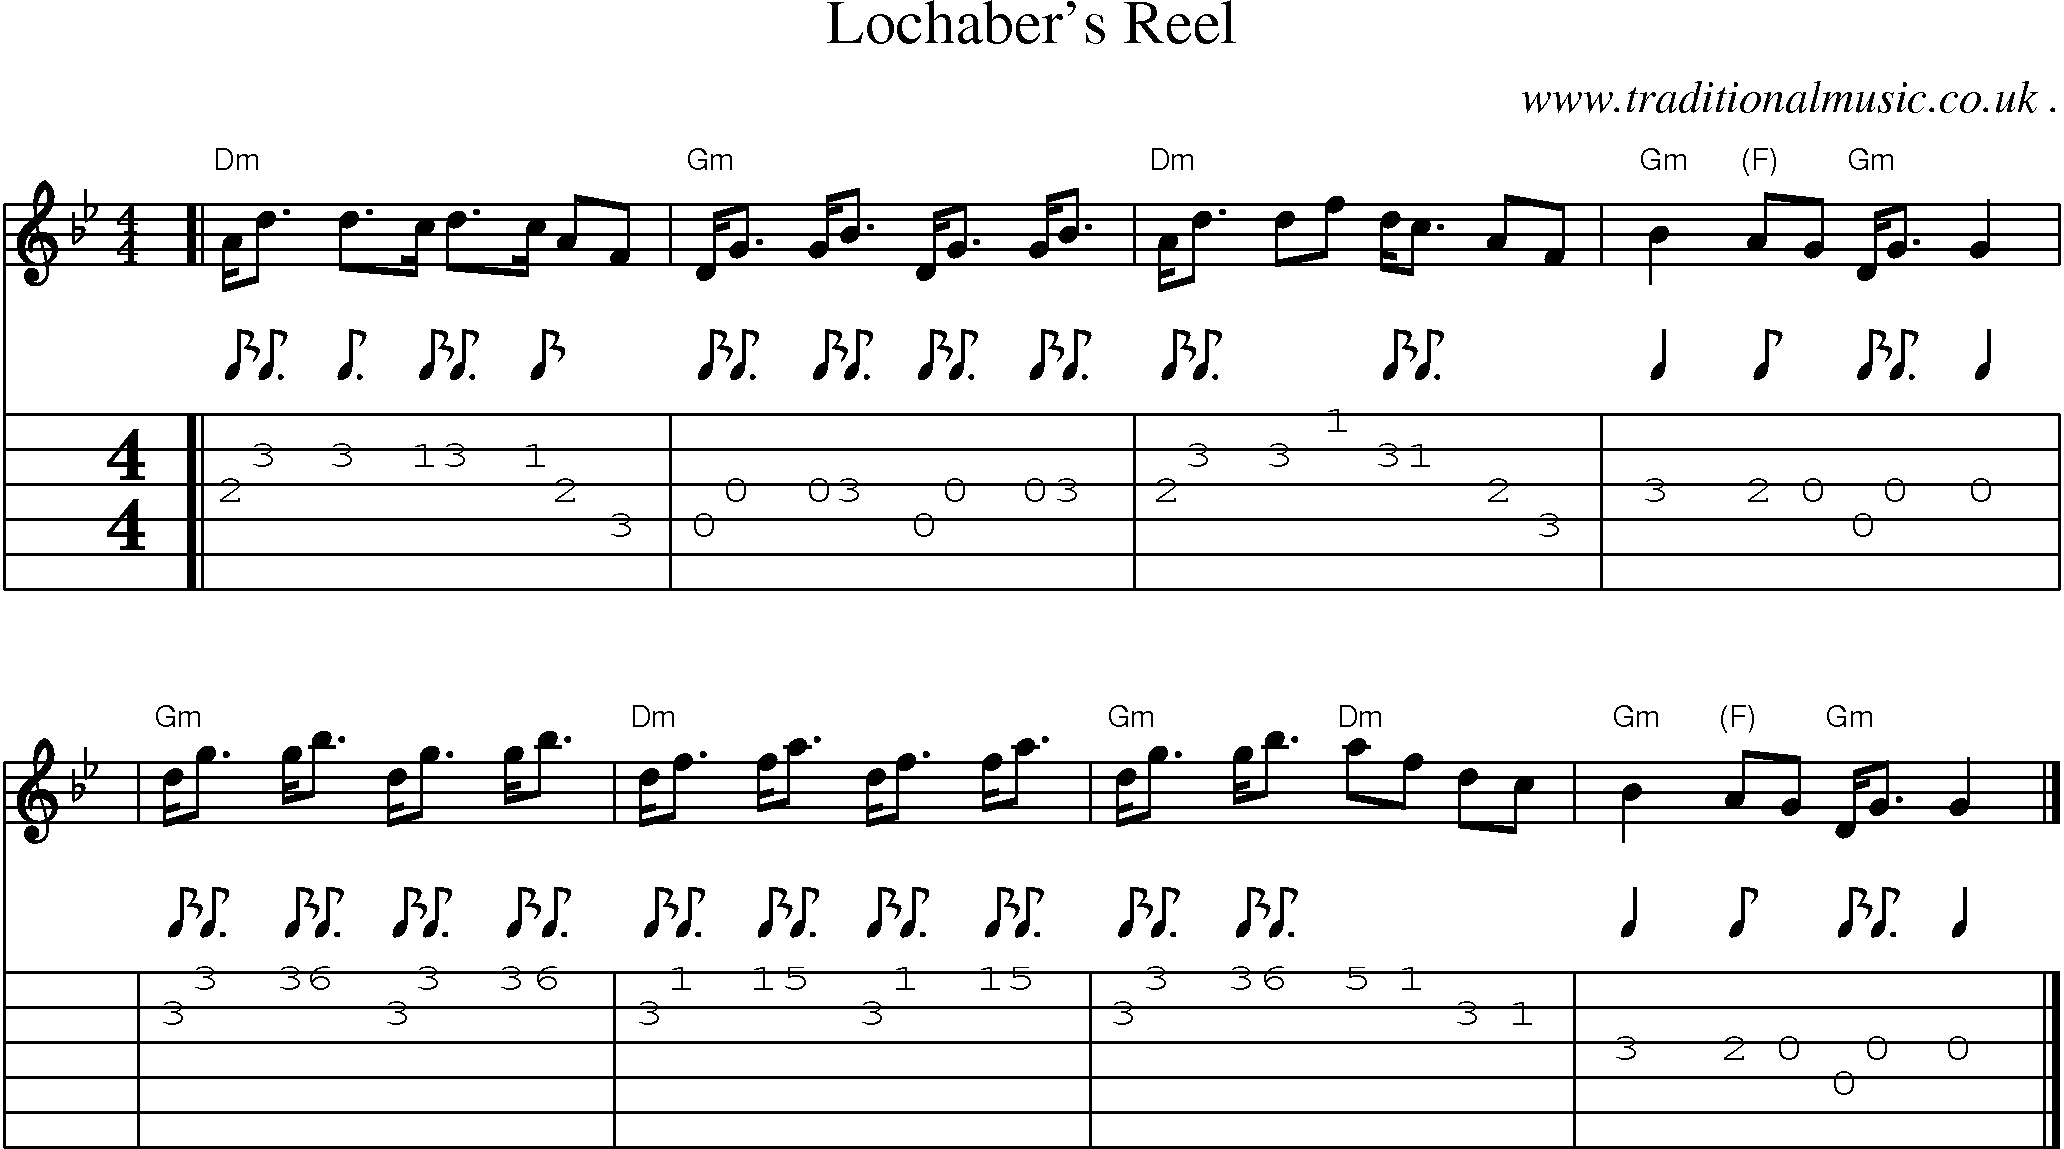 Sheet-music  score, Chords and Guitar Tabs for Lochabers Reel